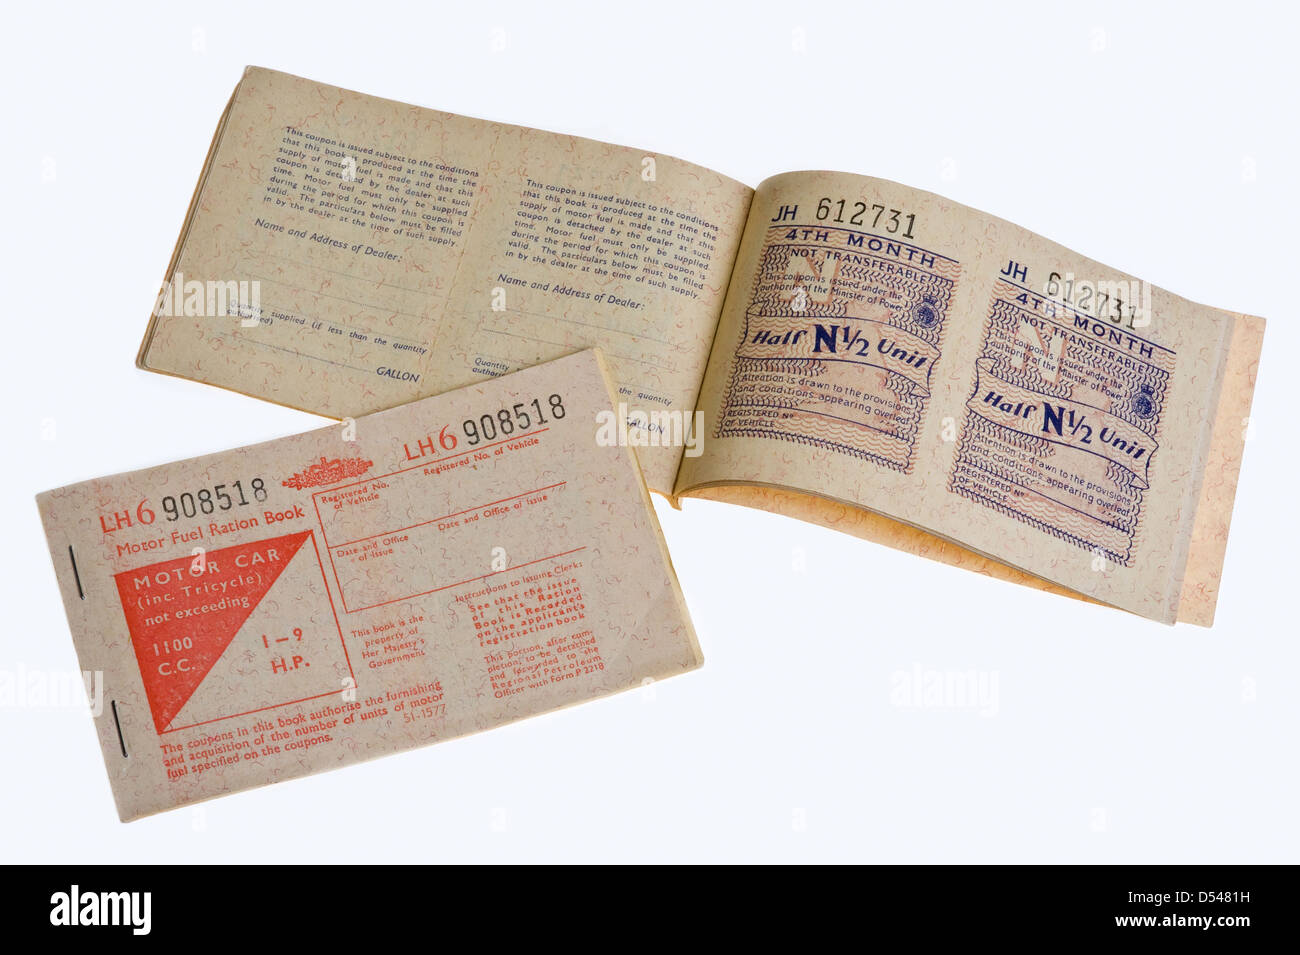 Petrol ration books, from 1973. Stock Photo